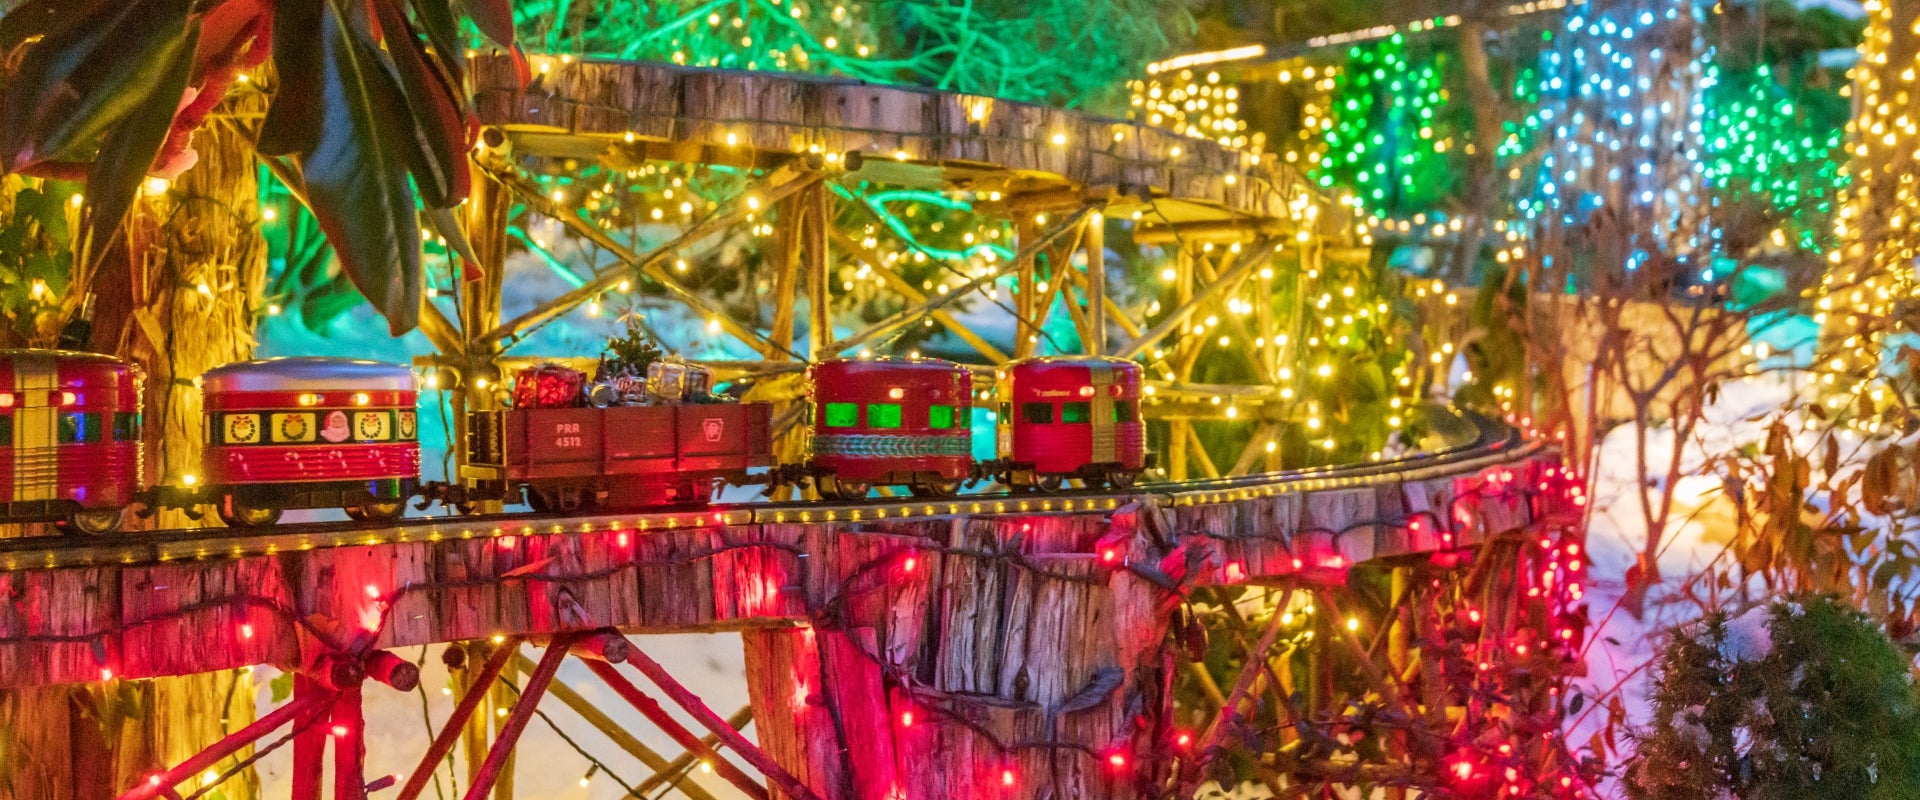 A miniature outdoor garden railway at night, decorated and lit up for Christmas. 